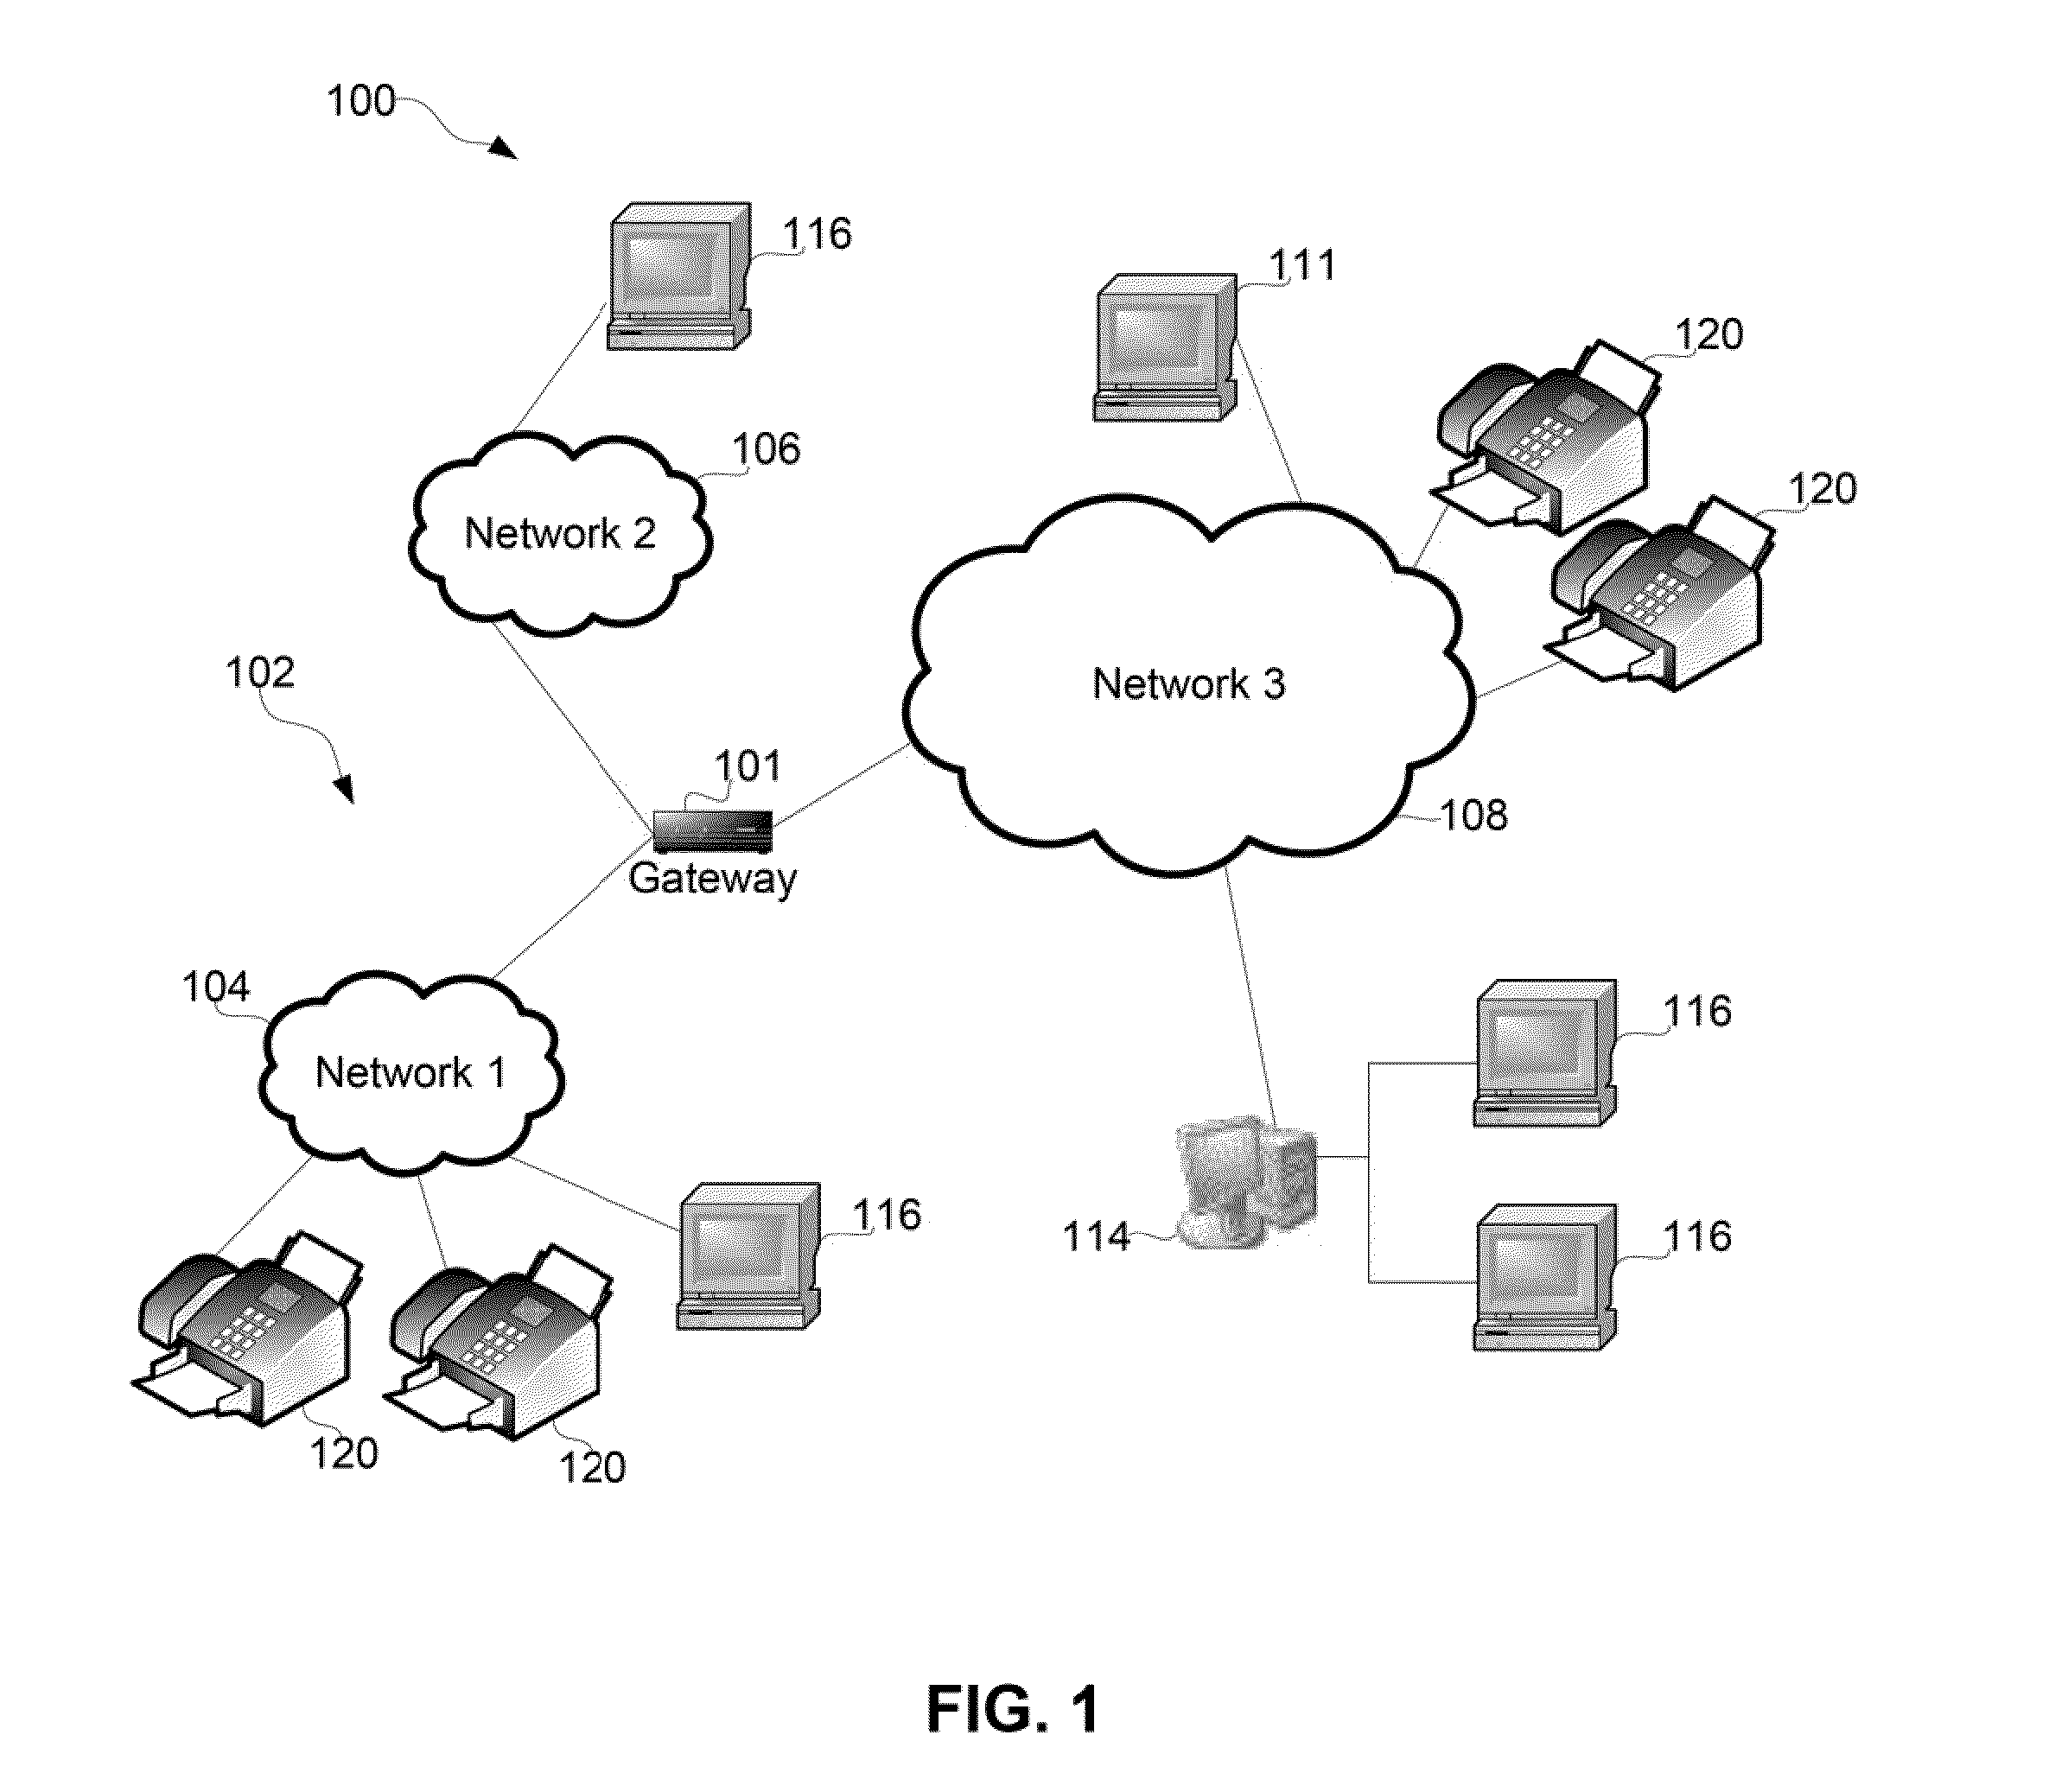 Primary storage media with associated secondary storage media for efficient data management